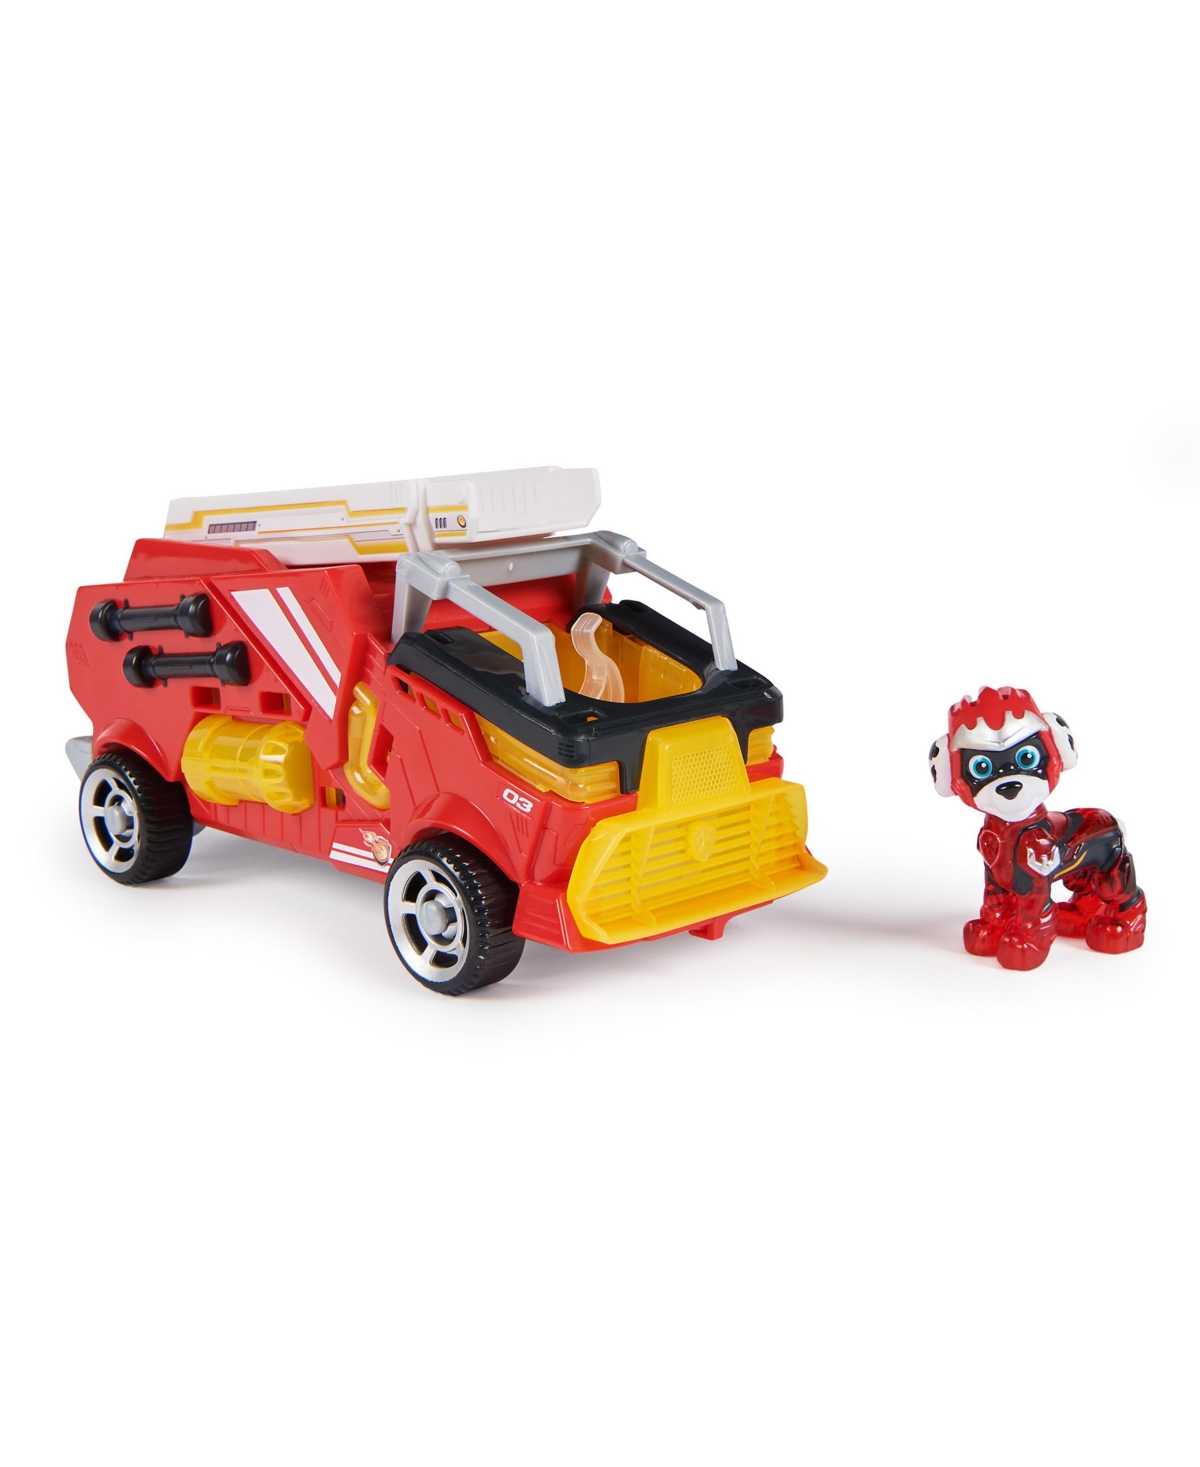 Paw Patrol Kids' - The Mighty Movie, Firetruck Toy With Marshall Mighty Pups Action Figure In No Color